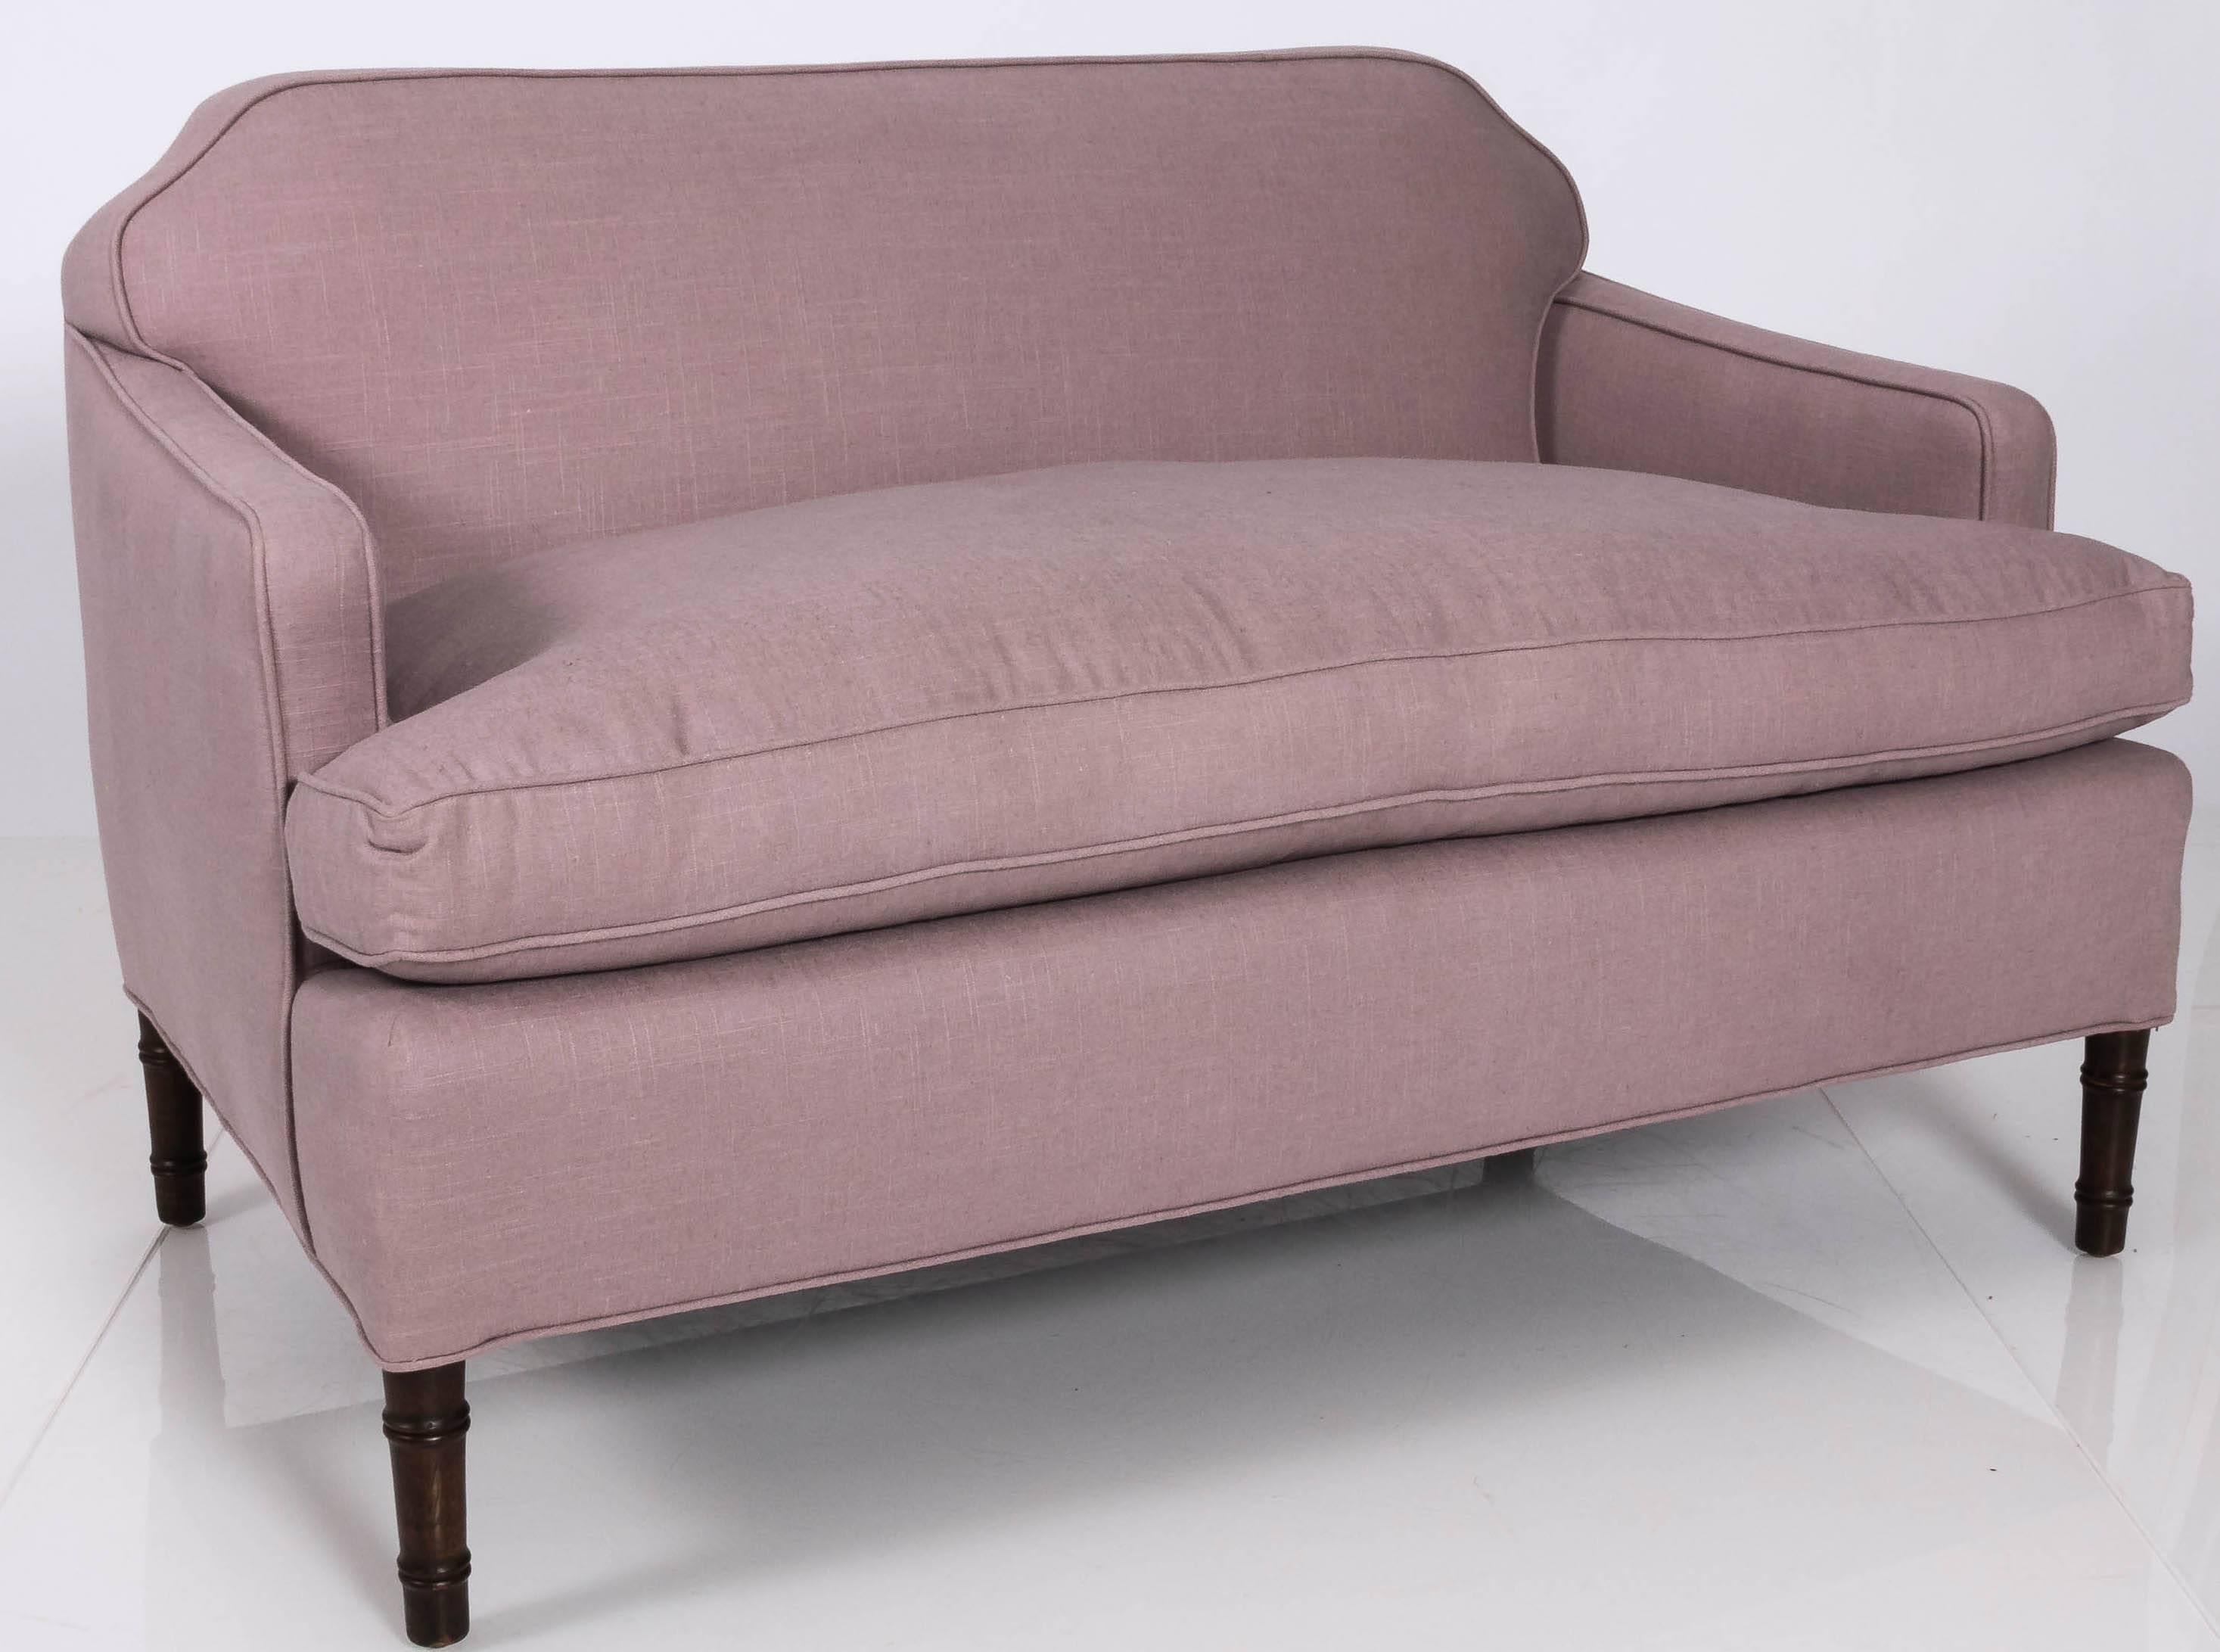 1960s newly upholstered small sofa with bamboo legs. Notched corner detailing. Down filled seat. Newly upholstered in pale purple linen by Schumacher. Seat is 22